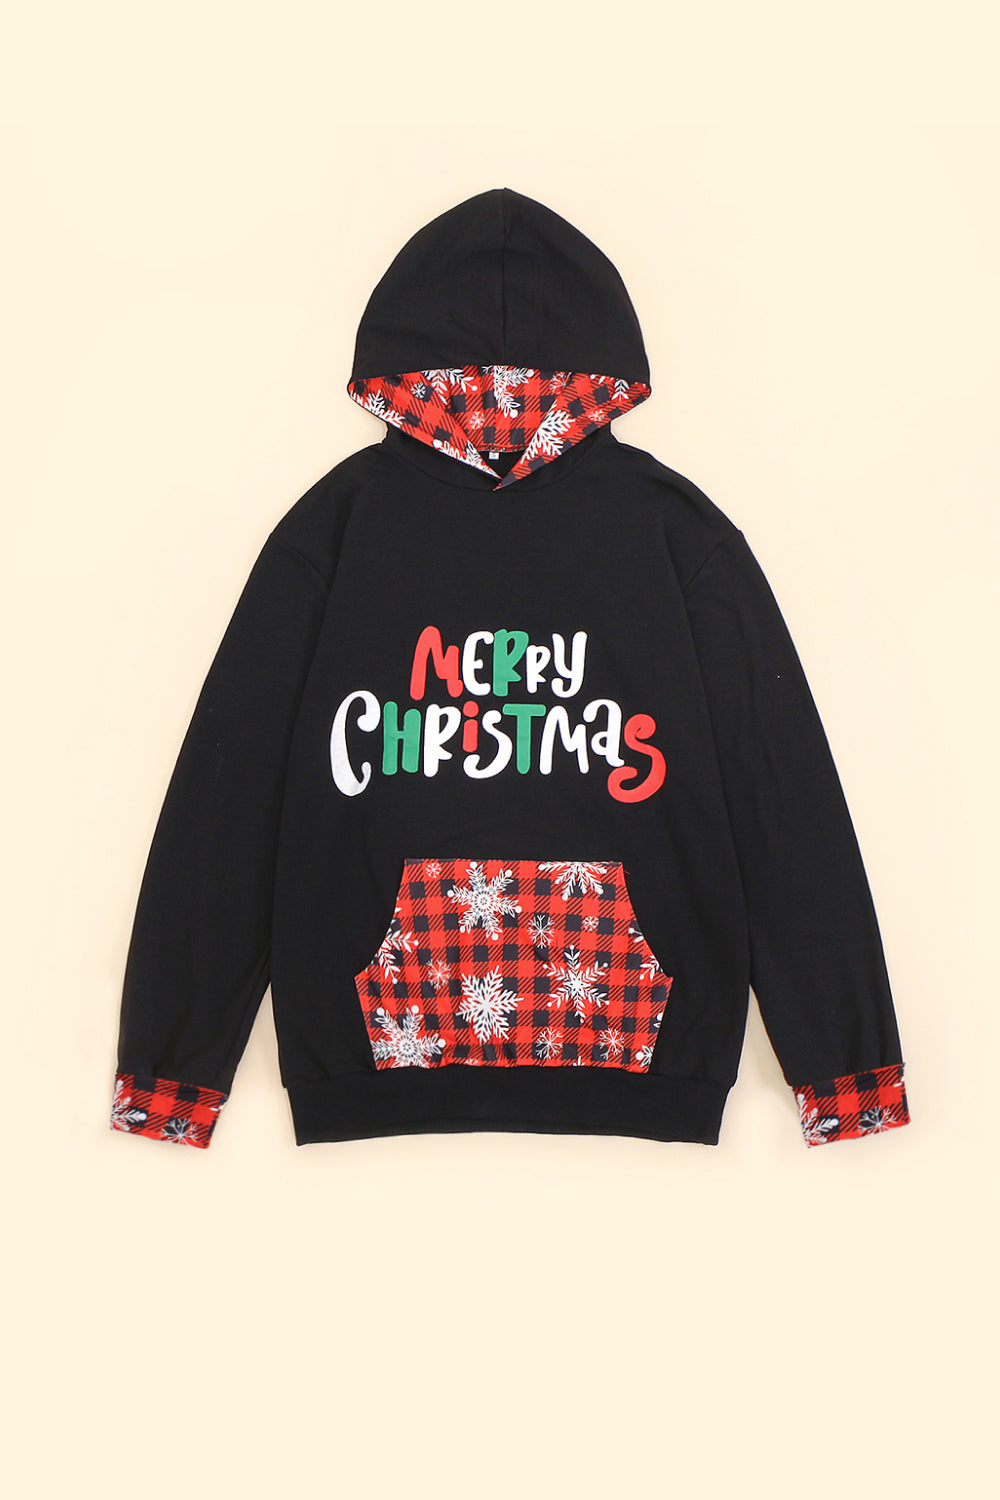 Christmas Graphic Hoodie for Dad